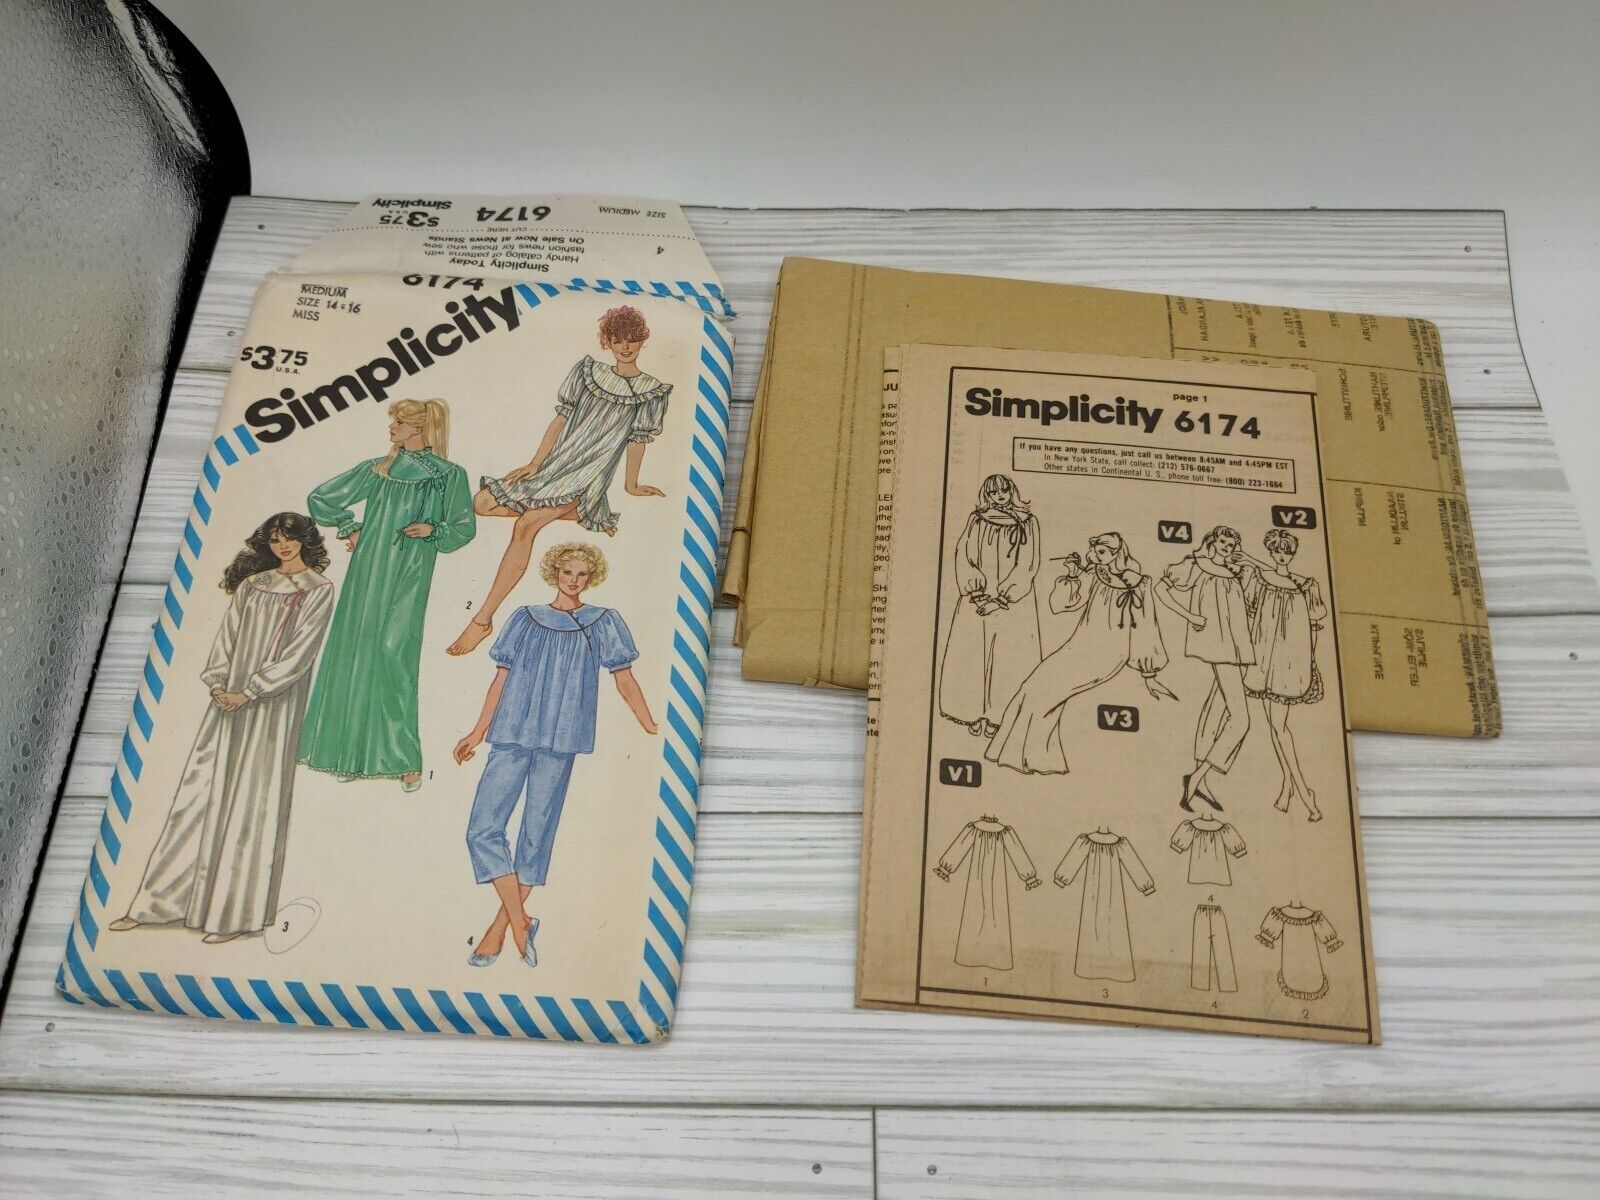 SIMPLICITY PATTERN 6174 MISSES Pajamas & Nightgowns SIZE 14-16 Vintage 1983